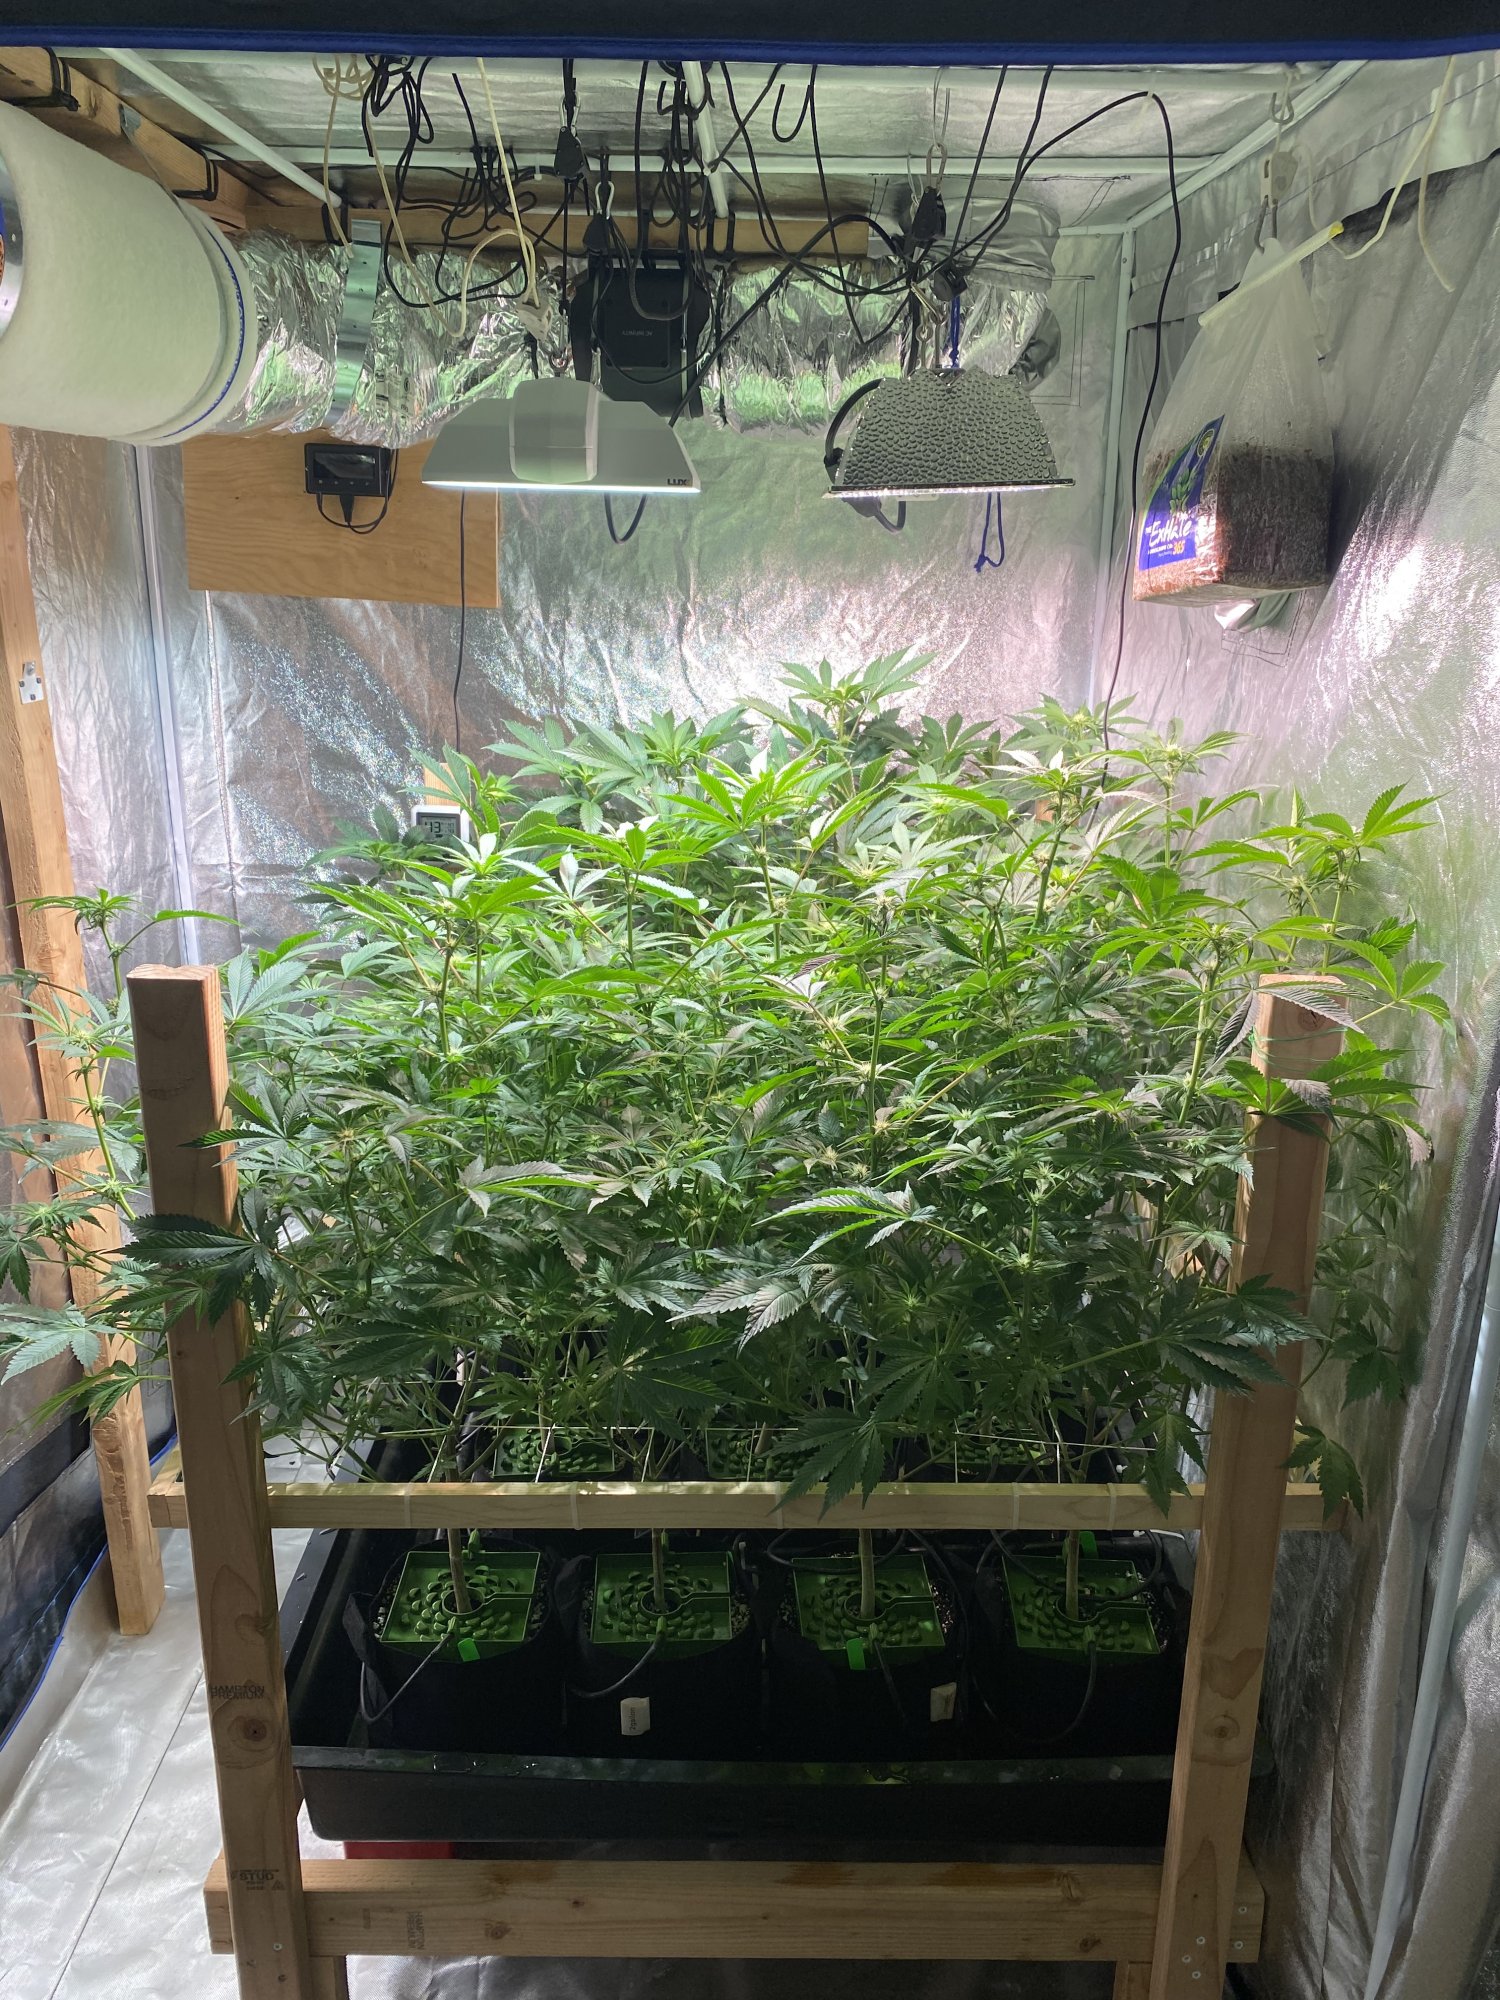 Would you defoliate these girls